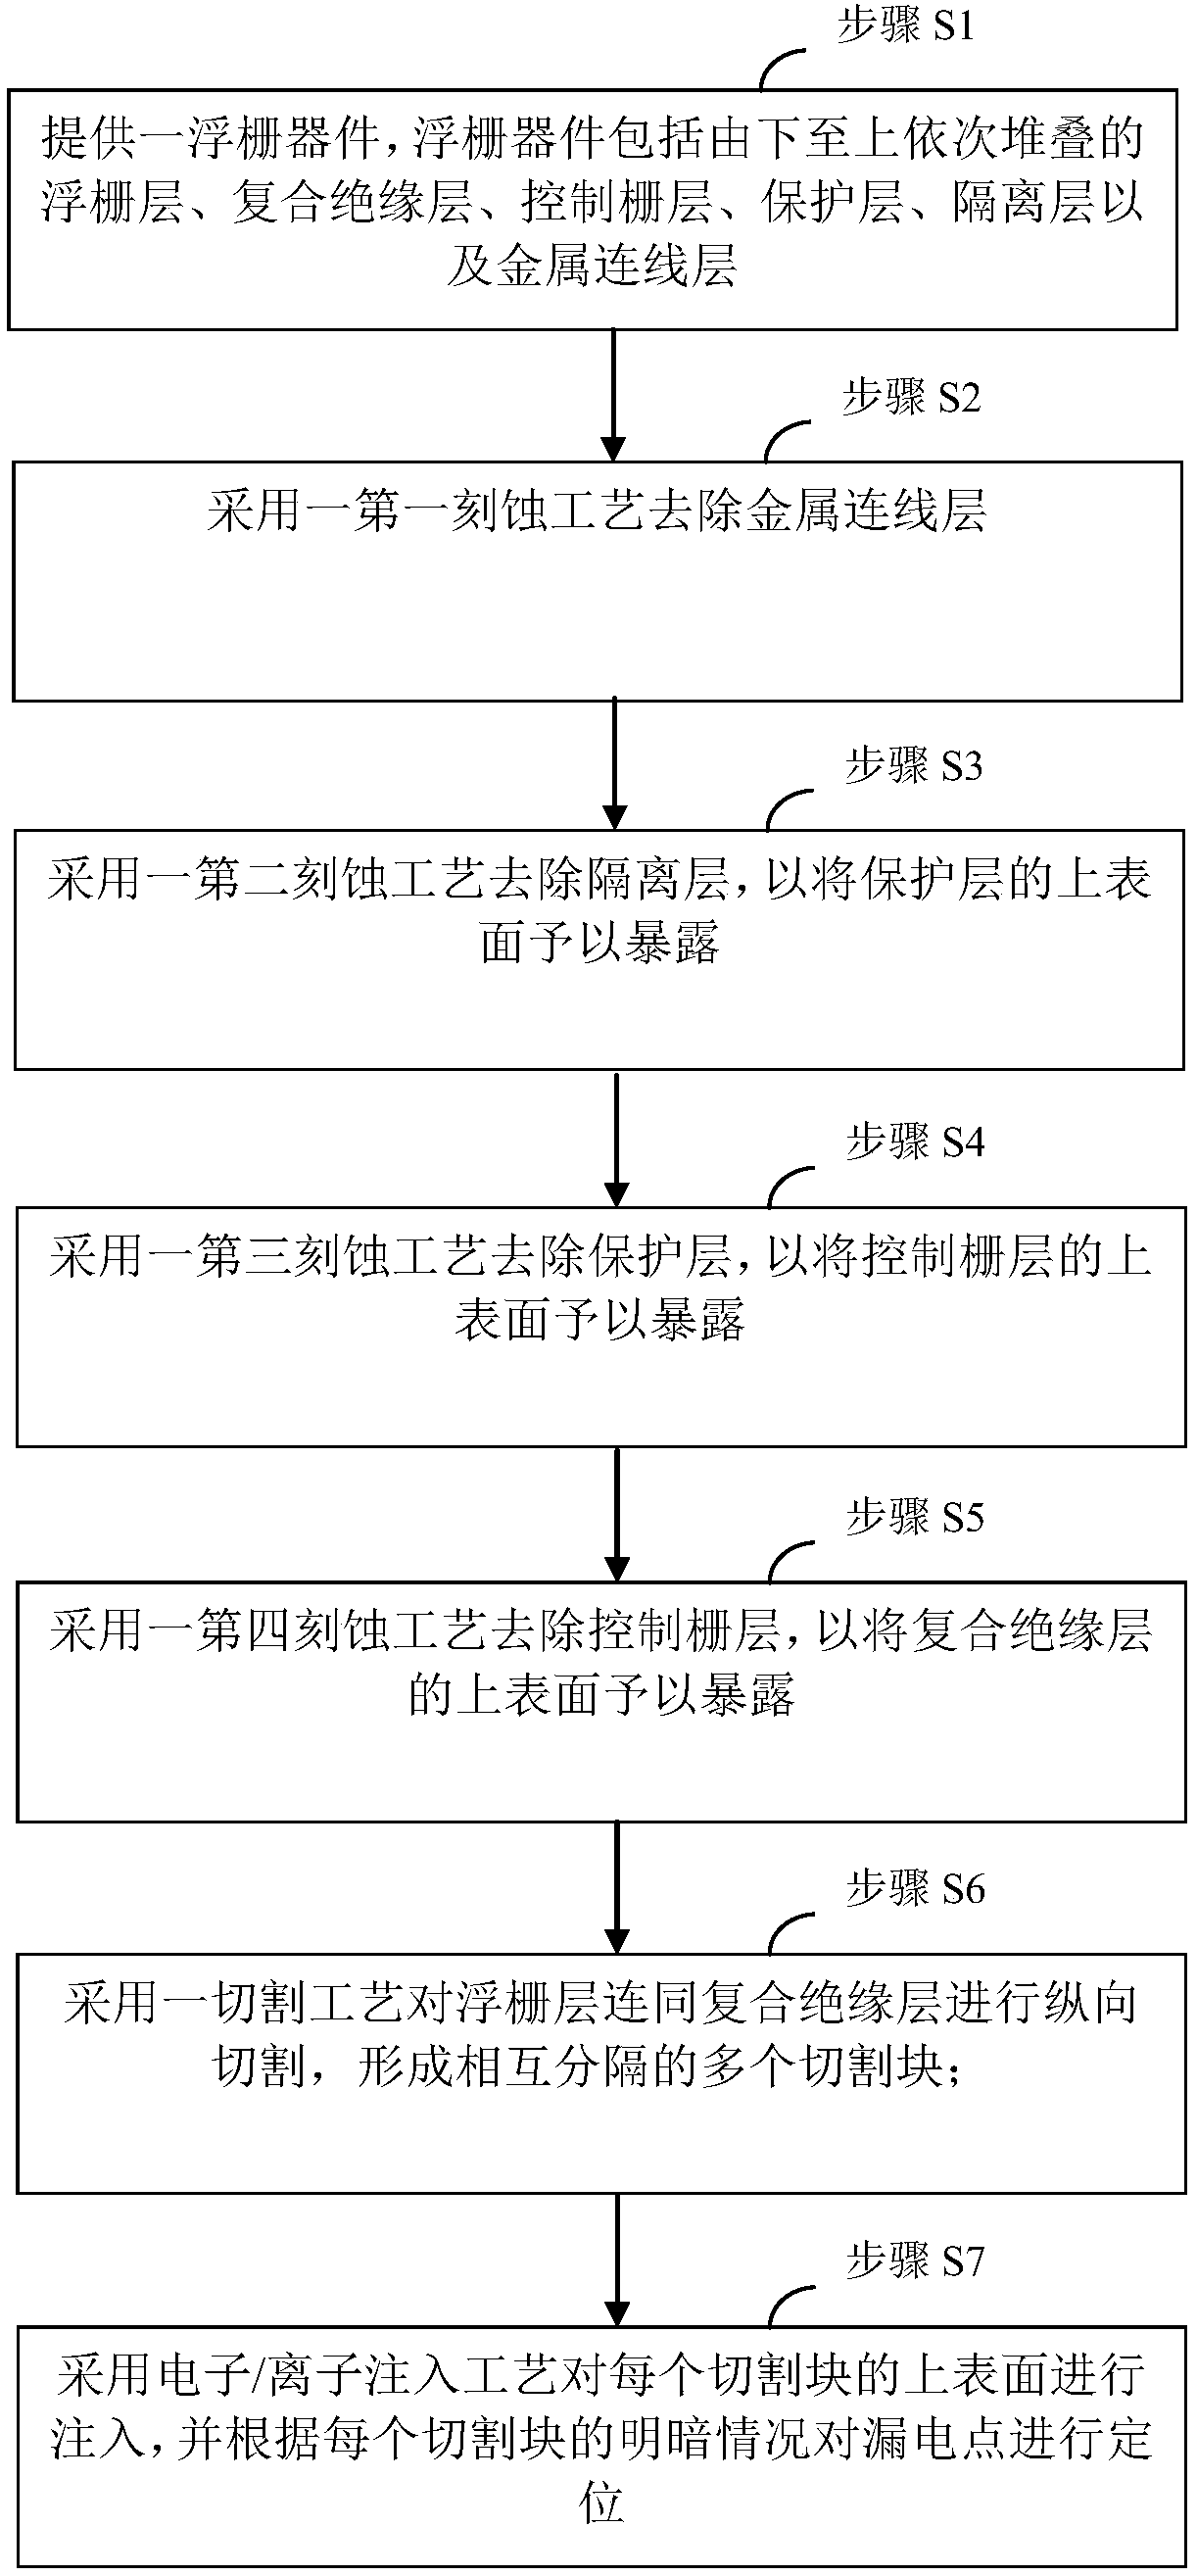 Electric leakage point positioning method for aiming at floating gate